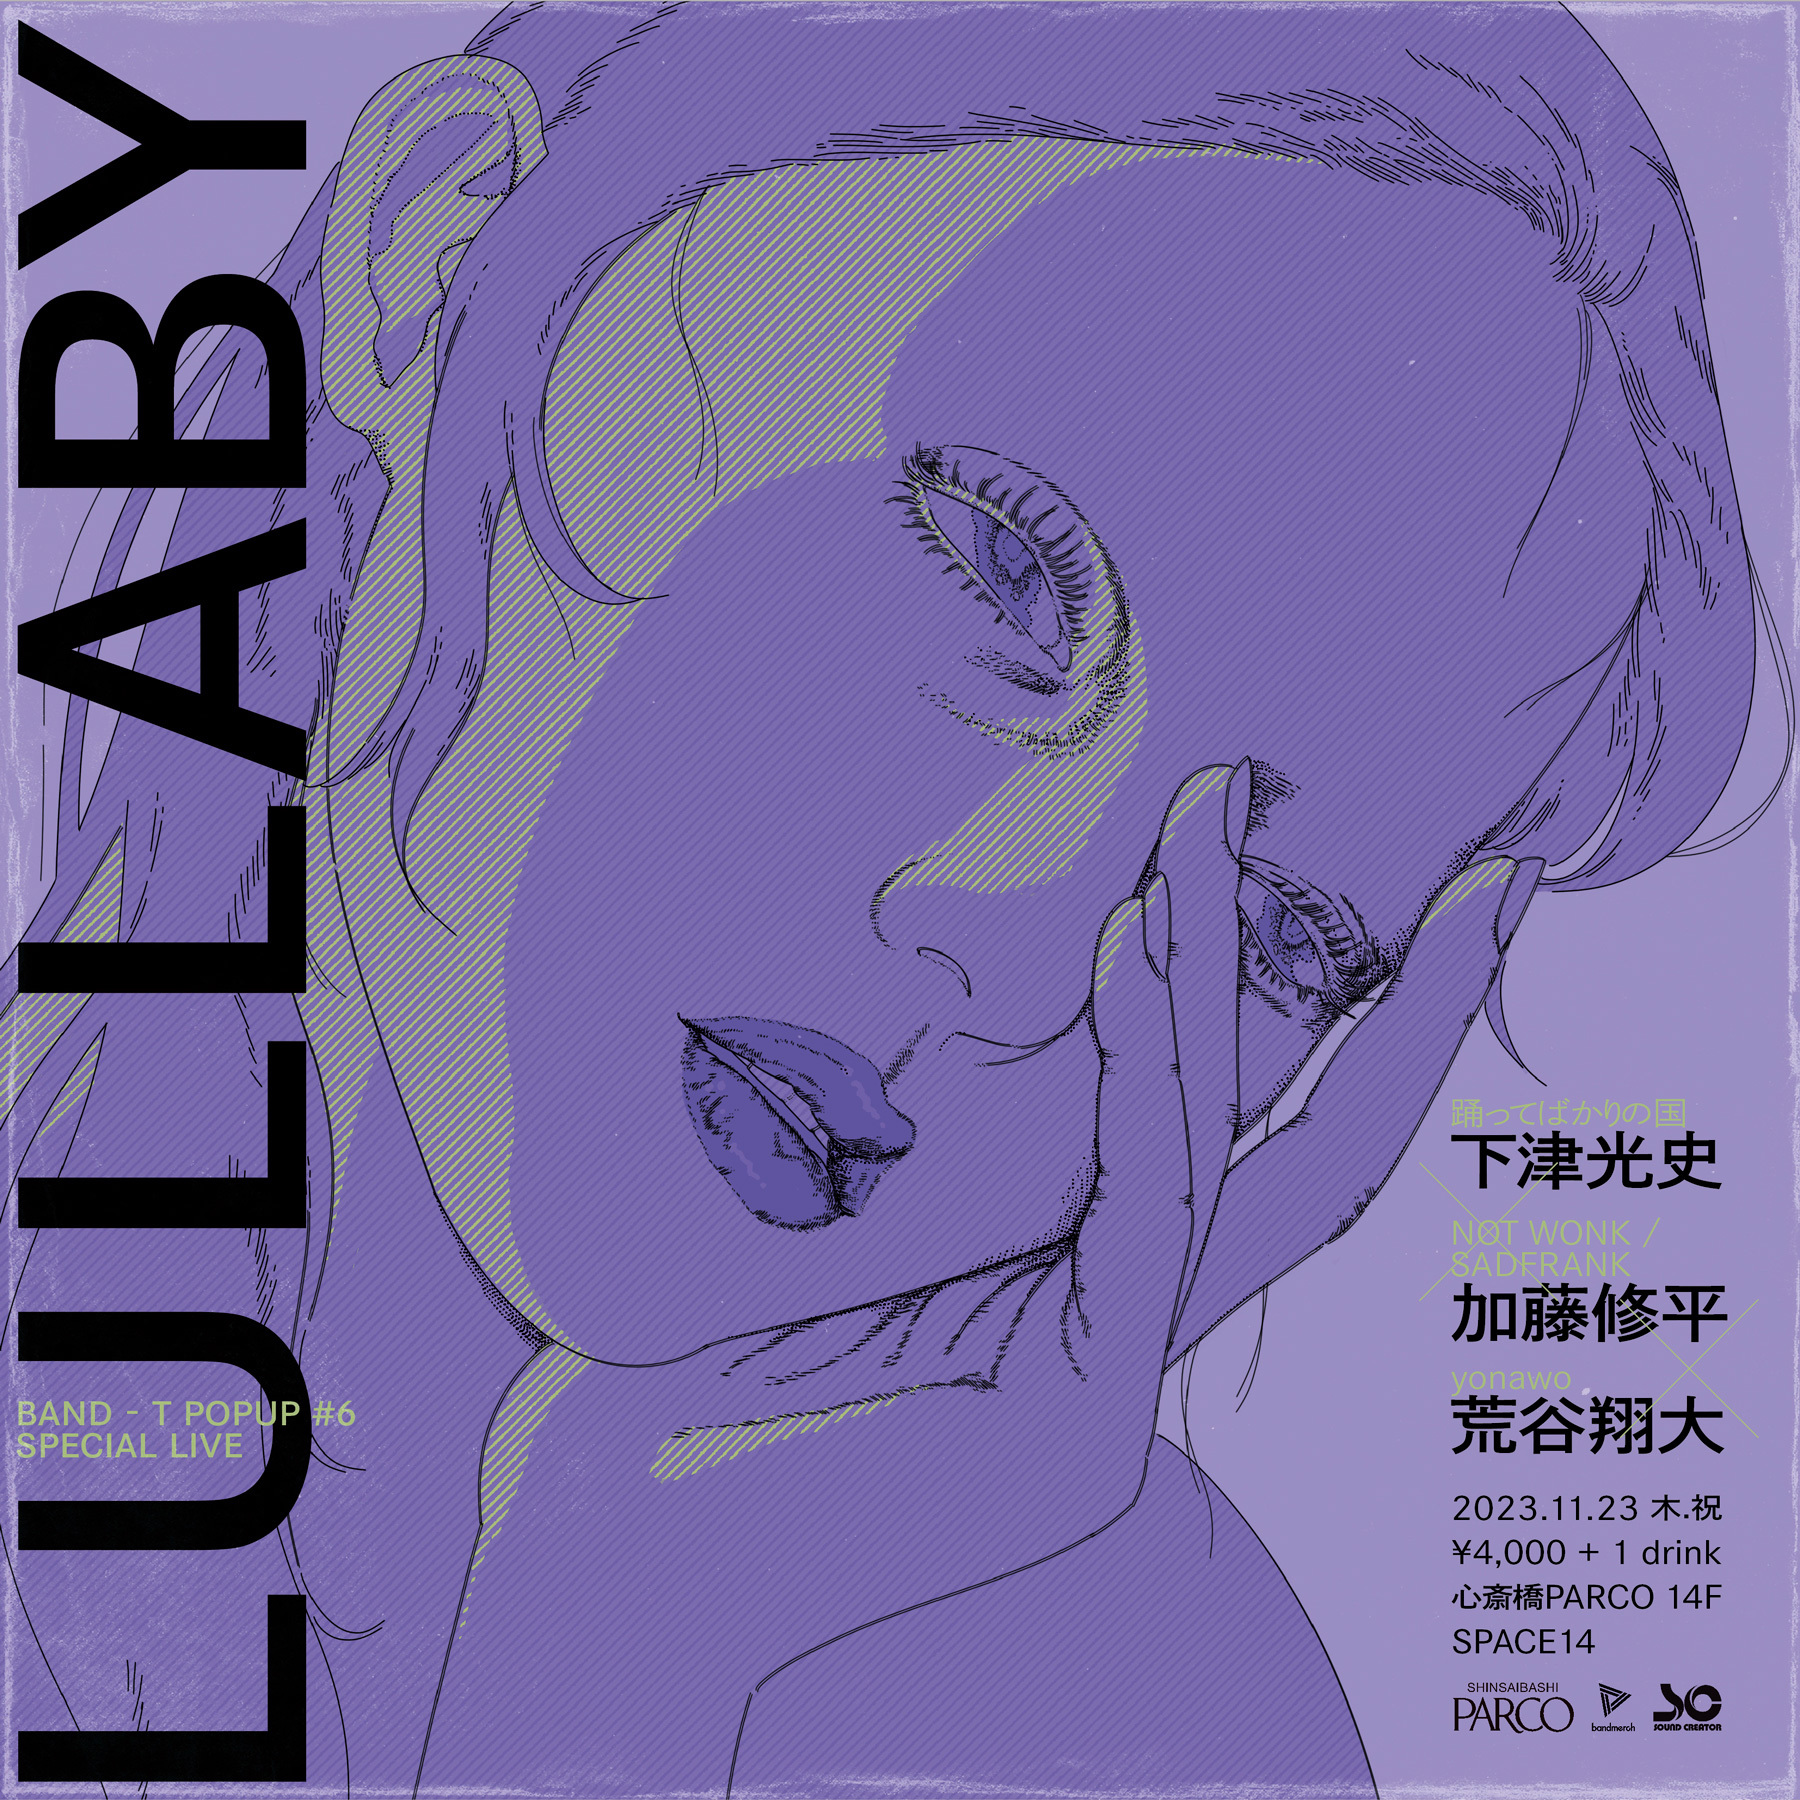 『Lullaby -BAND-T POPUP #6 SPECIAL LIVE -』